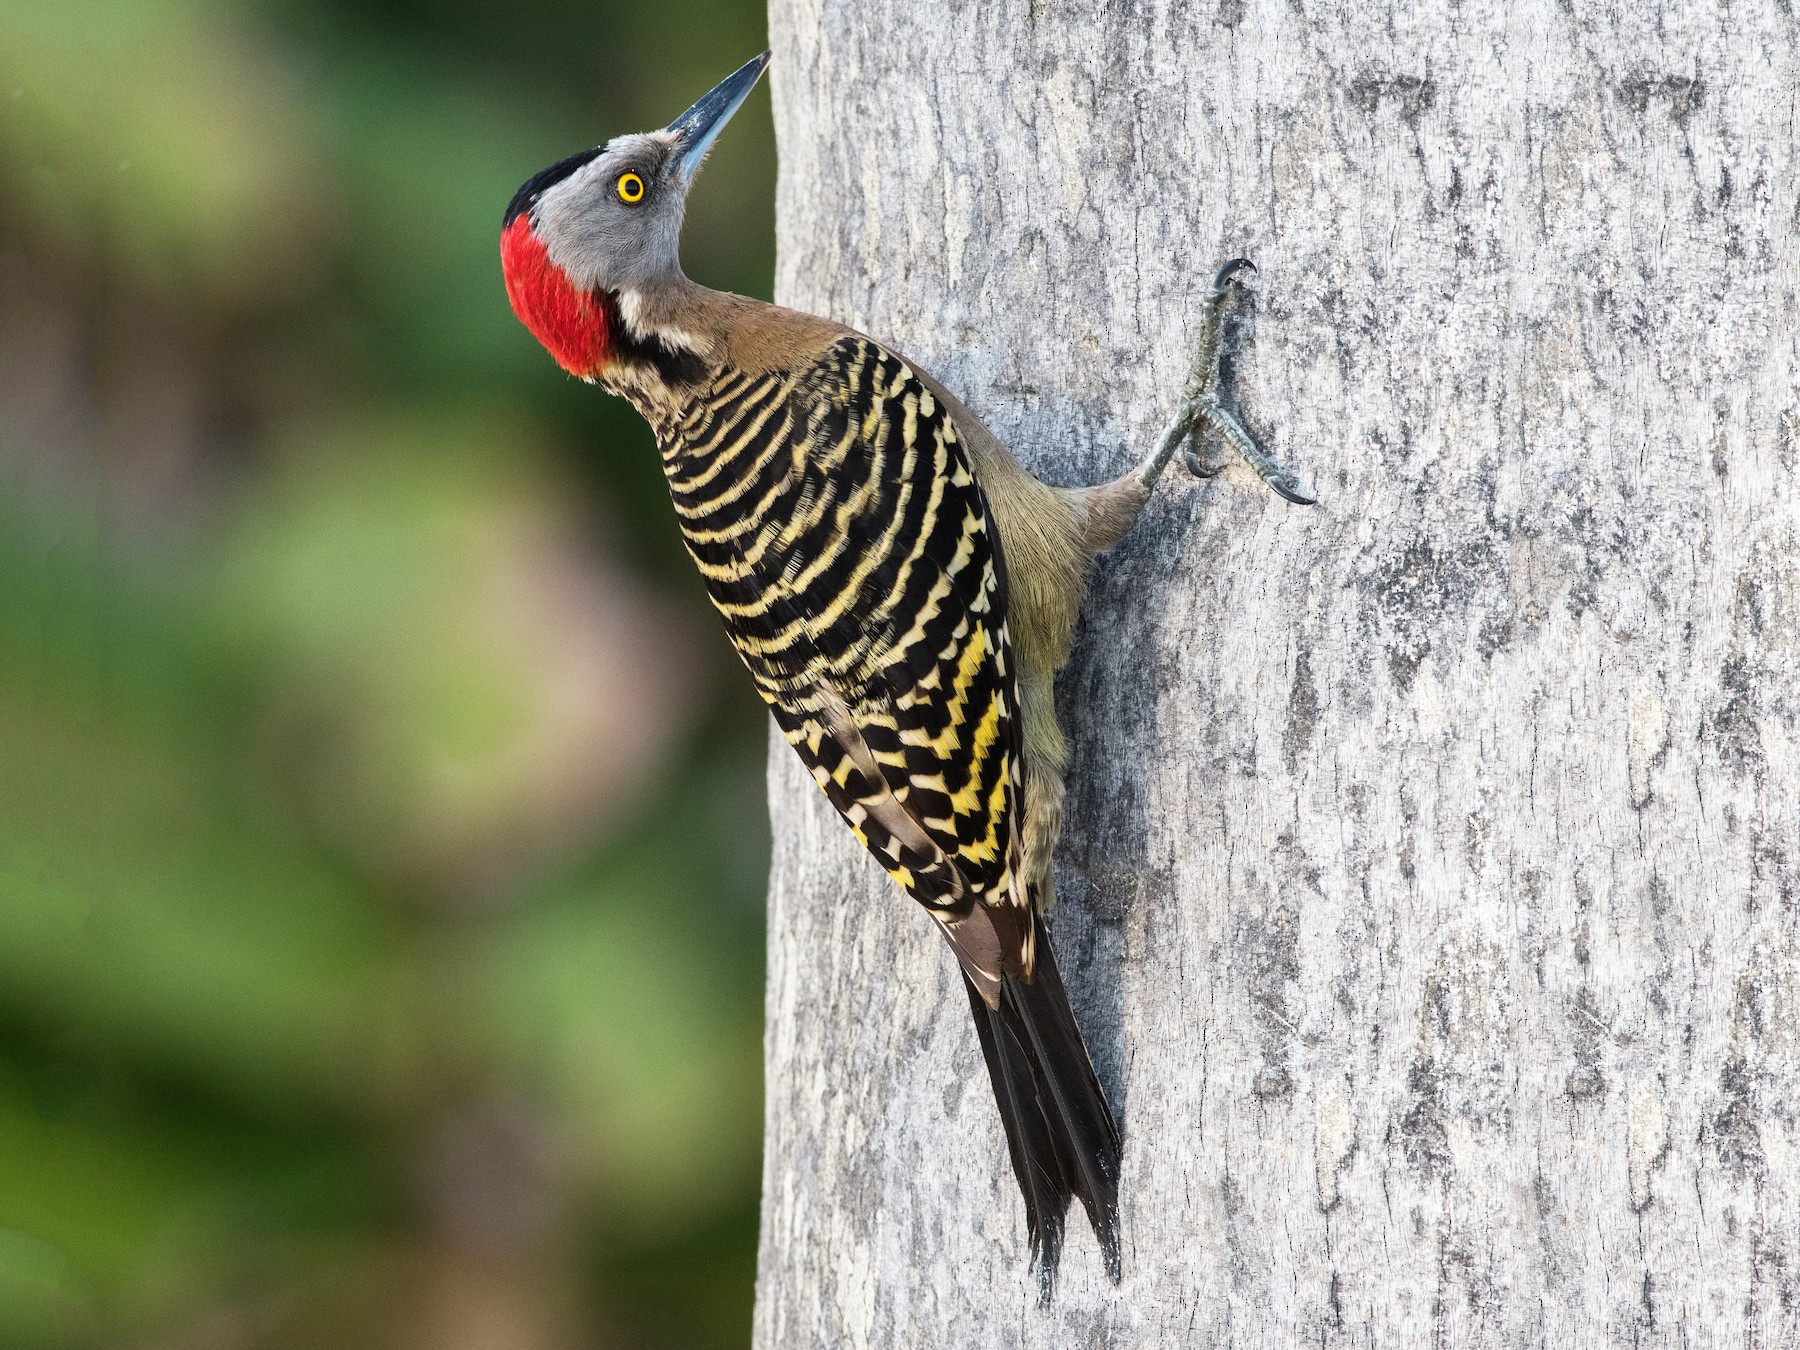 woodpeckers are the main enemy of cacao production, also rats.